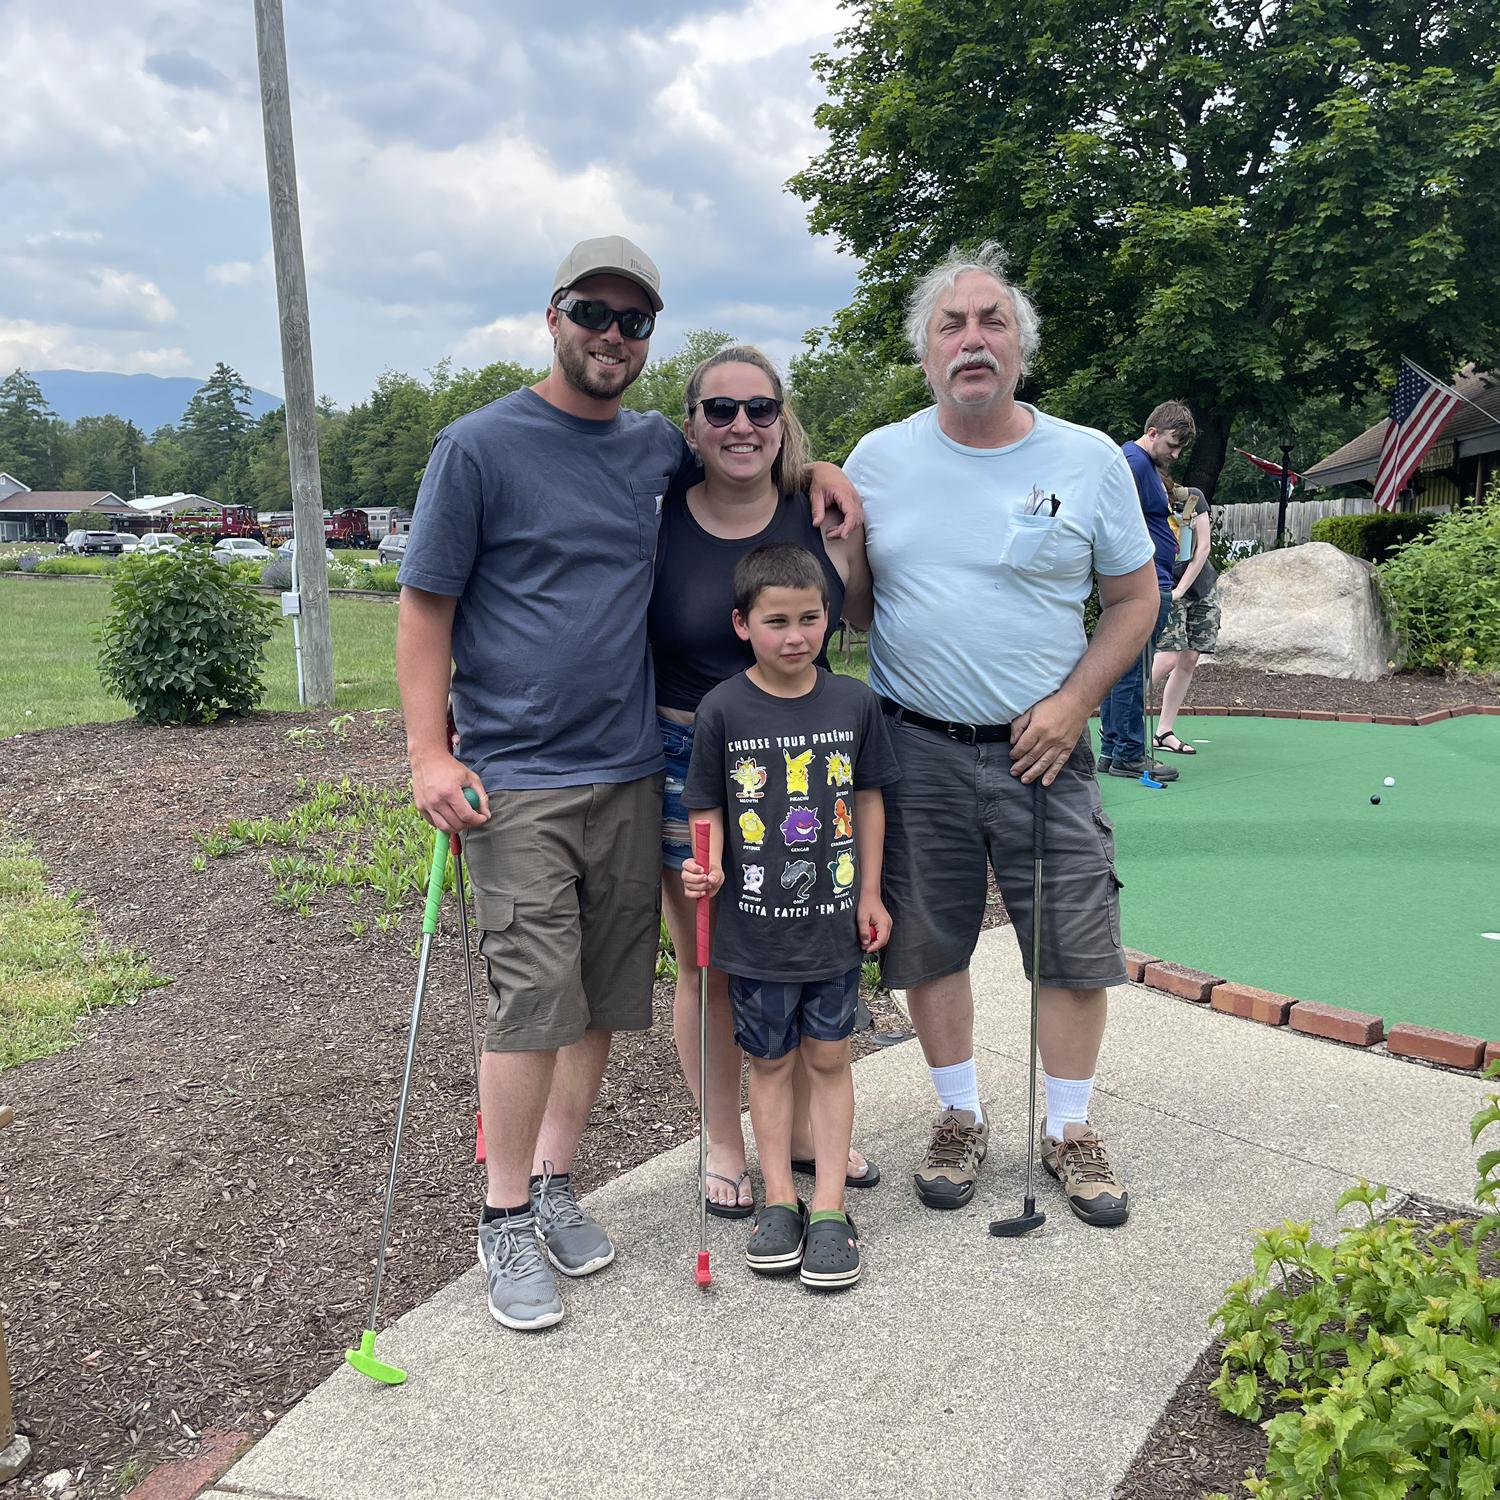 Just a little fathers day mini golf session